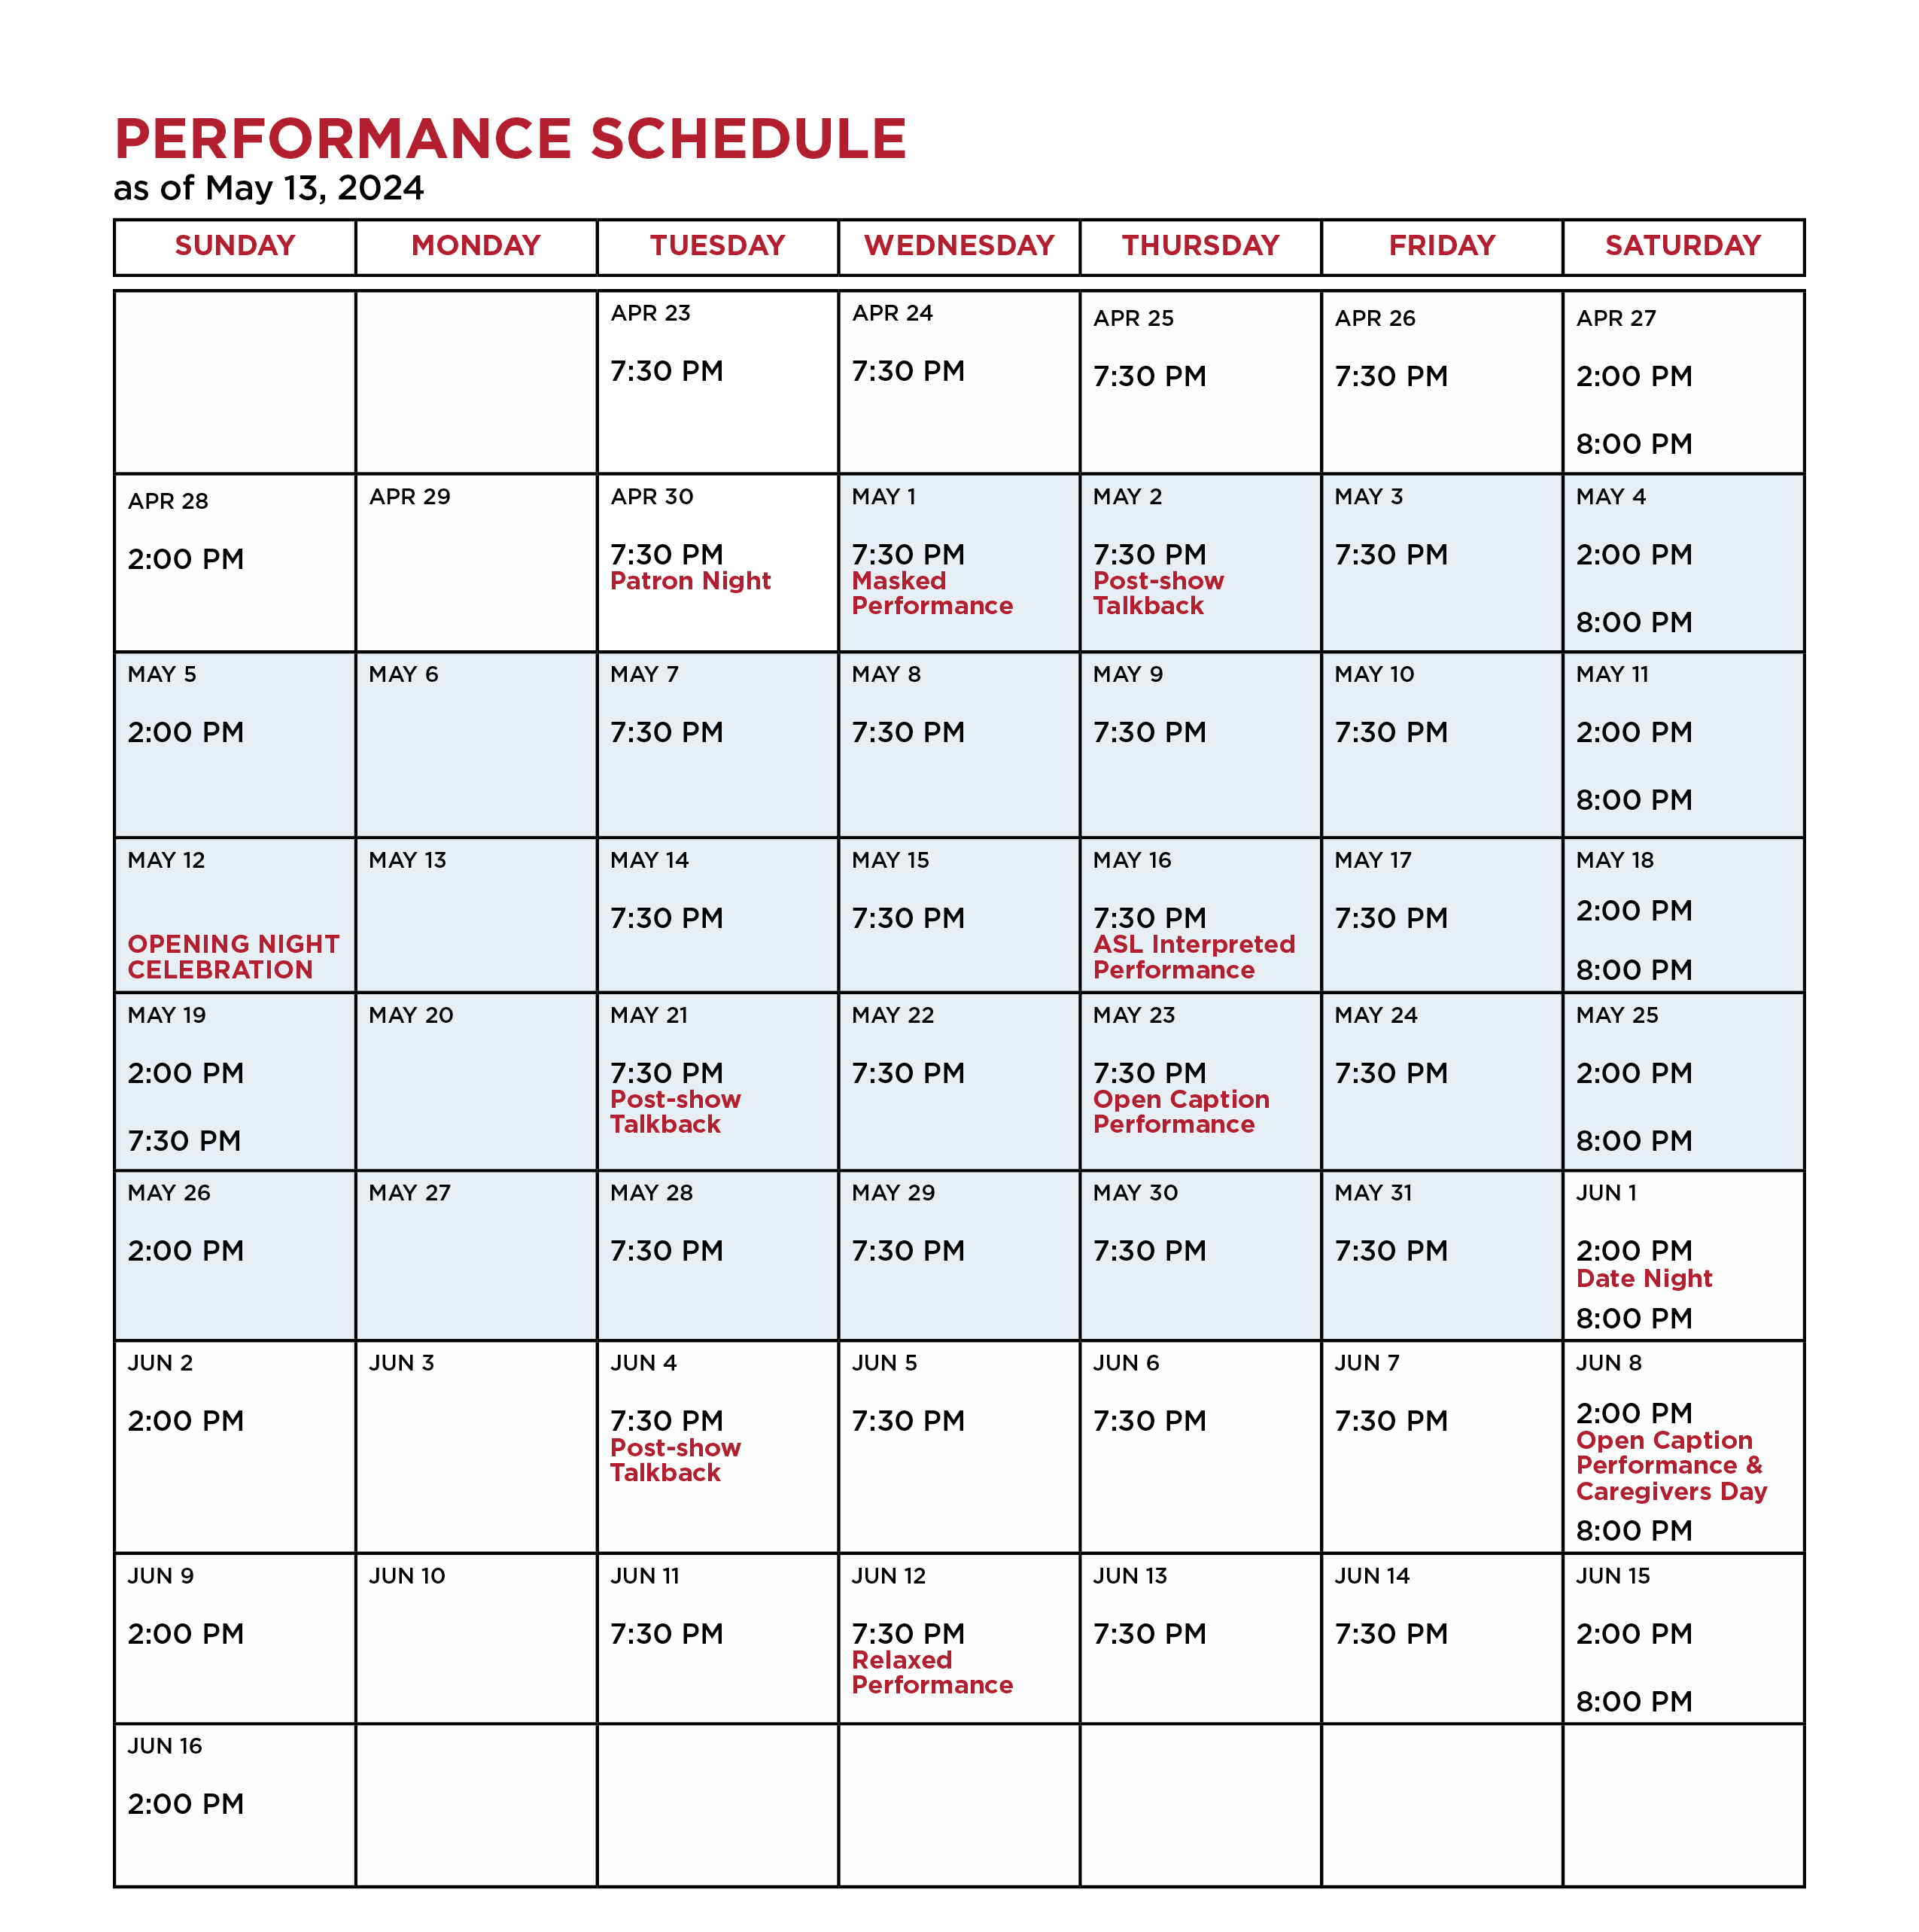 All of Me Performance Schedule as of 5/13/24. To View up to date show times, click BUY TICKETS